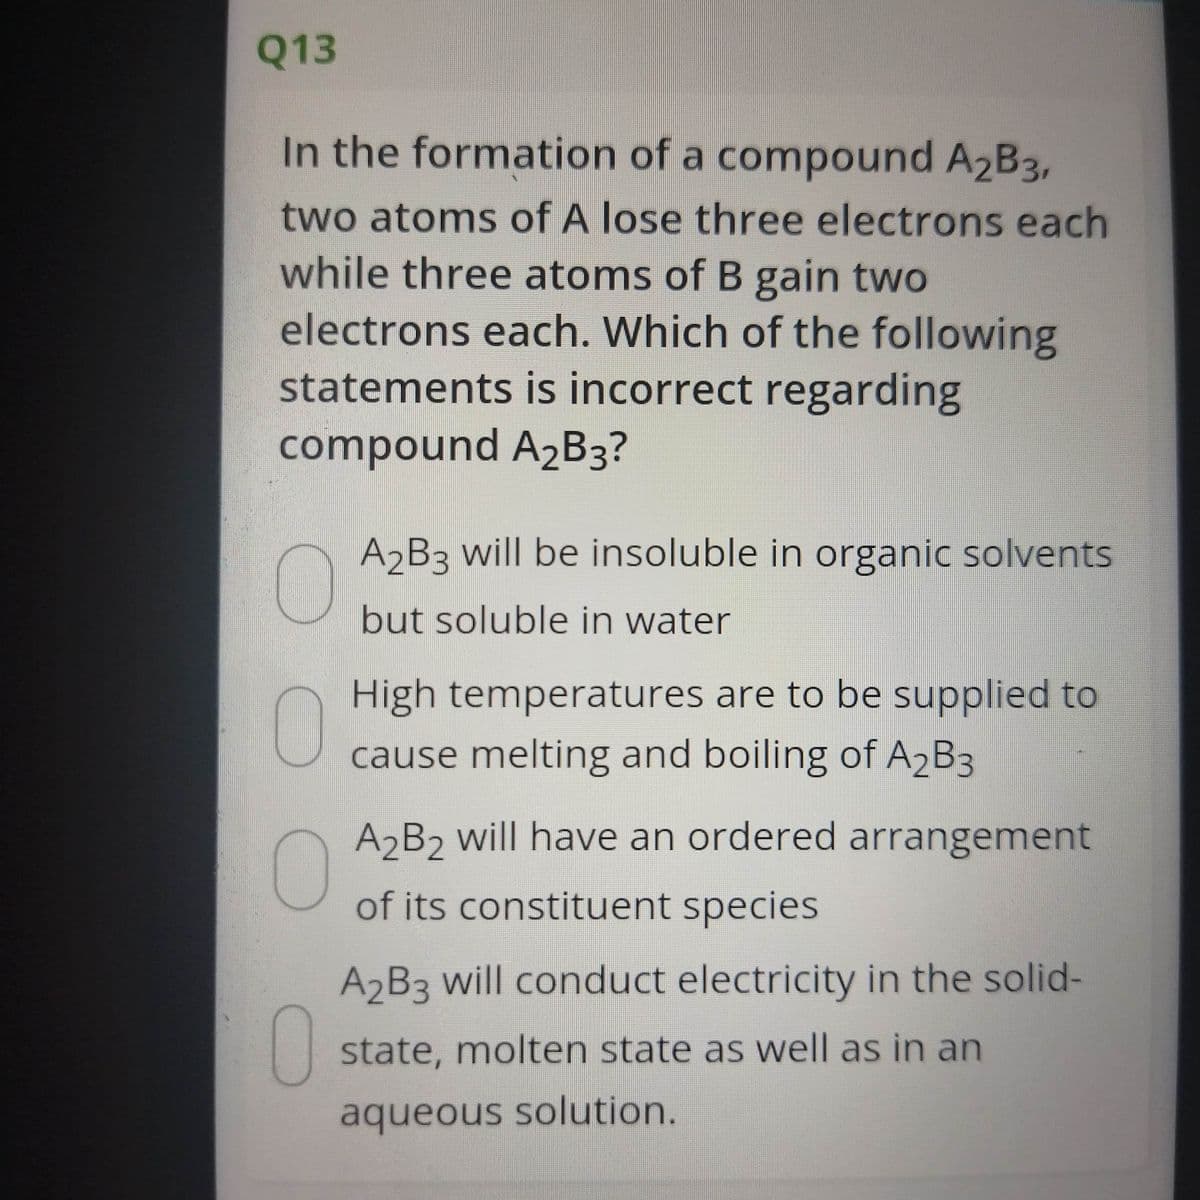 Q13
In the formation of a compound A2B3,
two atoms of A lose three electrons each
while three atoms of B gain two
electrons each. Which of the following
statements is incorrect regarding
compound A2B3?
A2B3 will be insoluble in organic solvents
but soluble in water
High temperatures are to be supplied to
cause melting and boiling of A2B3
A B2 will have an ordered arrangement
of its constituent species
A B3 will conduct electricity in the solid-
0
state, molten state as well as in an
aqueous solution.
